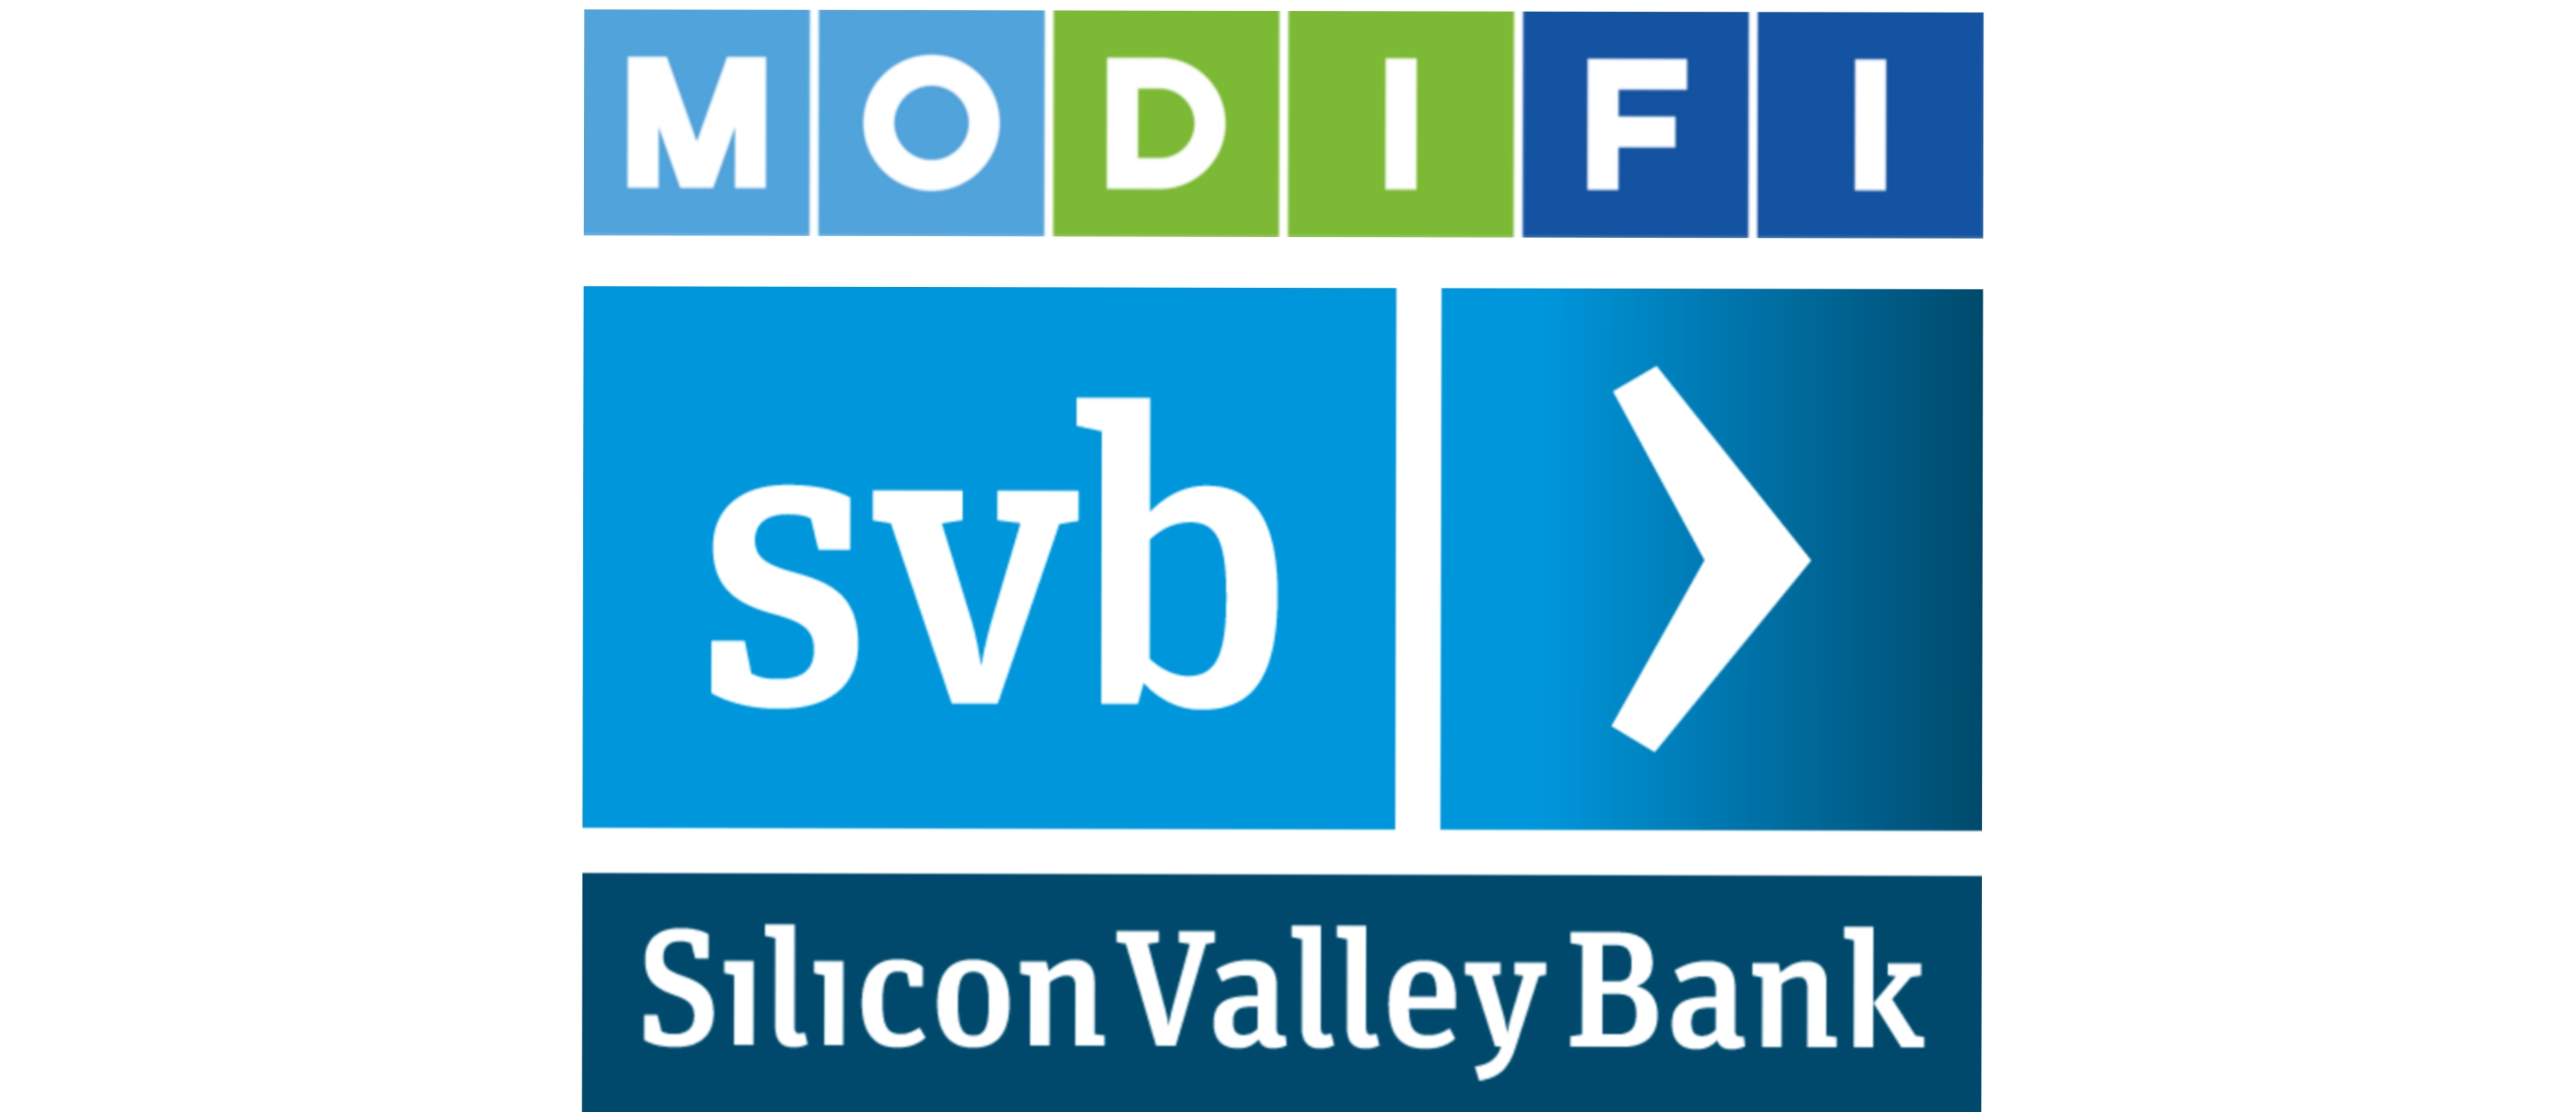 MODIFI Announces New 60M USD Debt Facility with Silicon Valley Bank, Brings Total Raised Capital to 111M USD to Fuel Global Expansion